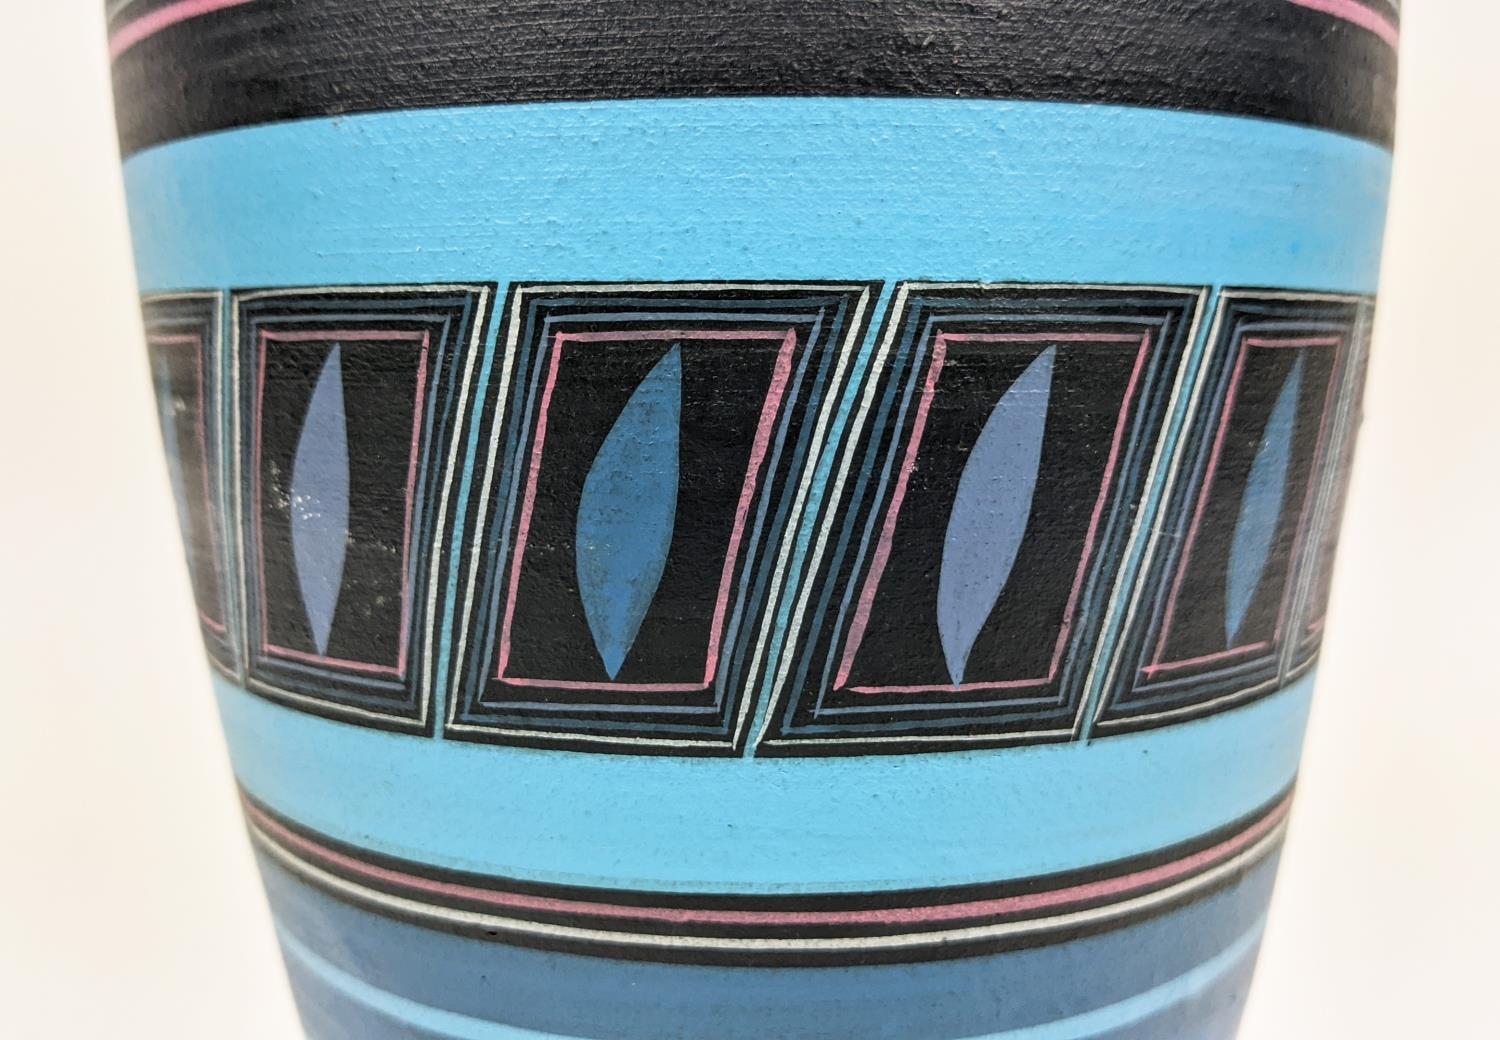 A PORTUGESE STUDIO POTTERY VASE, late 20th Century, hand painted in a geometric design, terracotta - Image 3 of 7